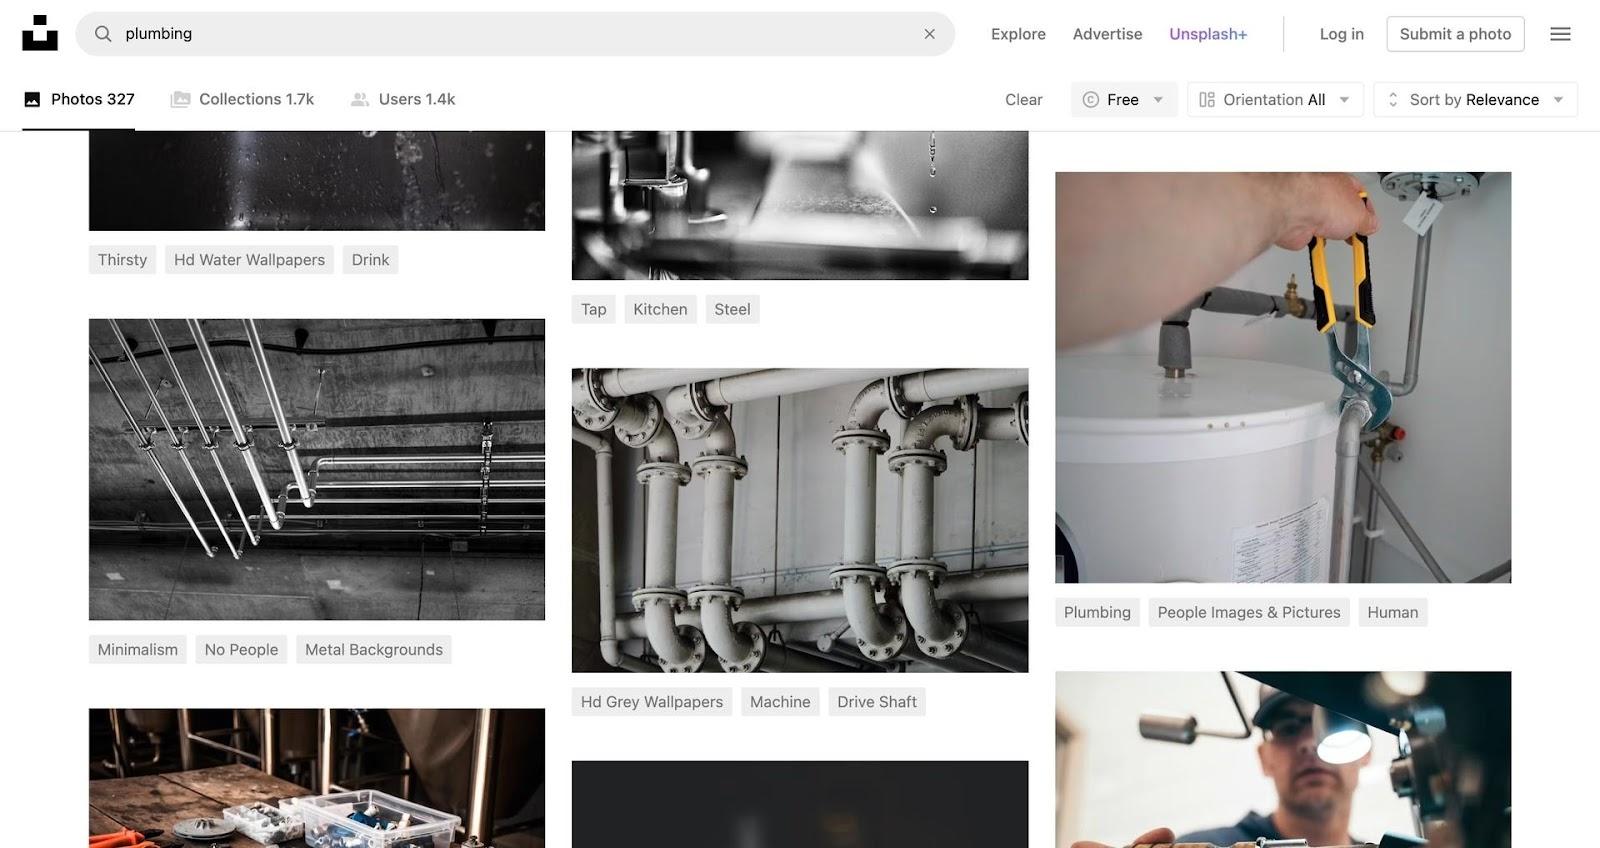 Unsplash results page for "plumbing"